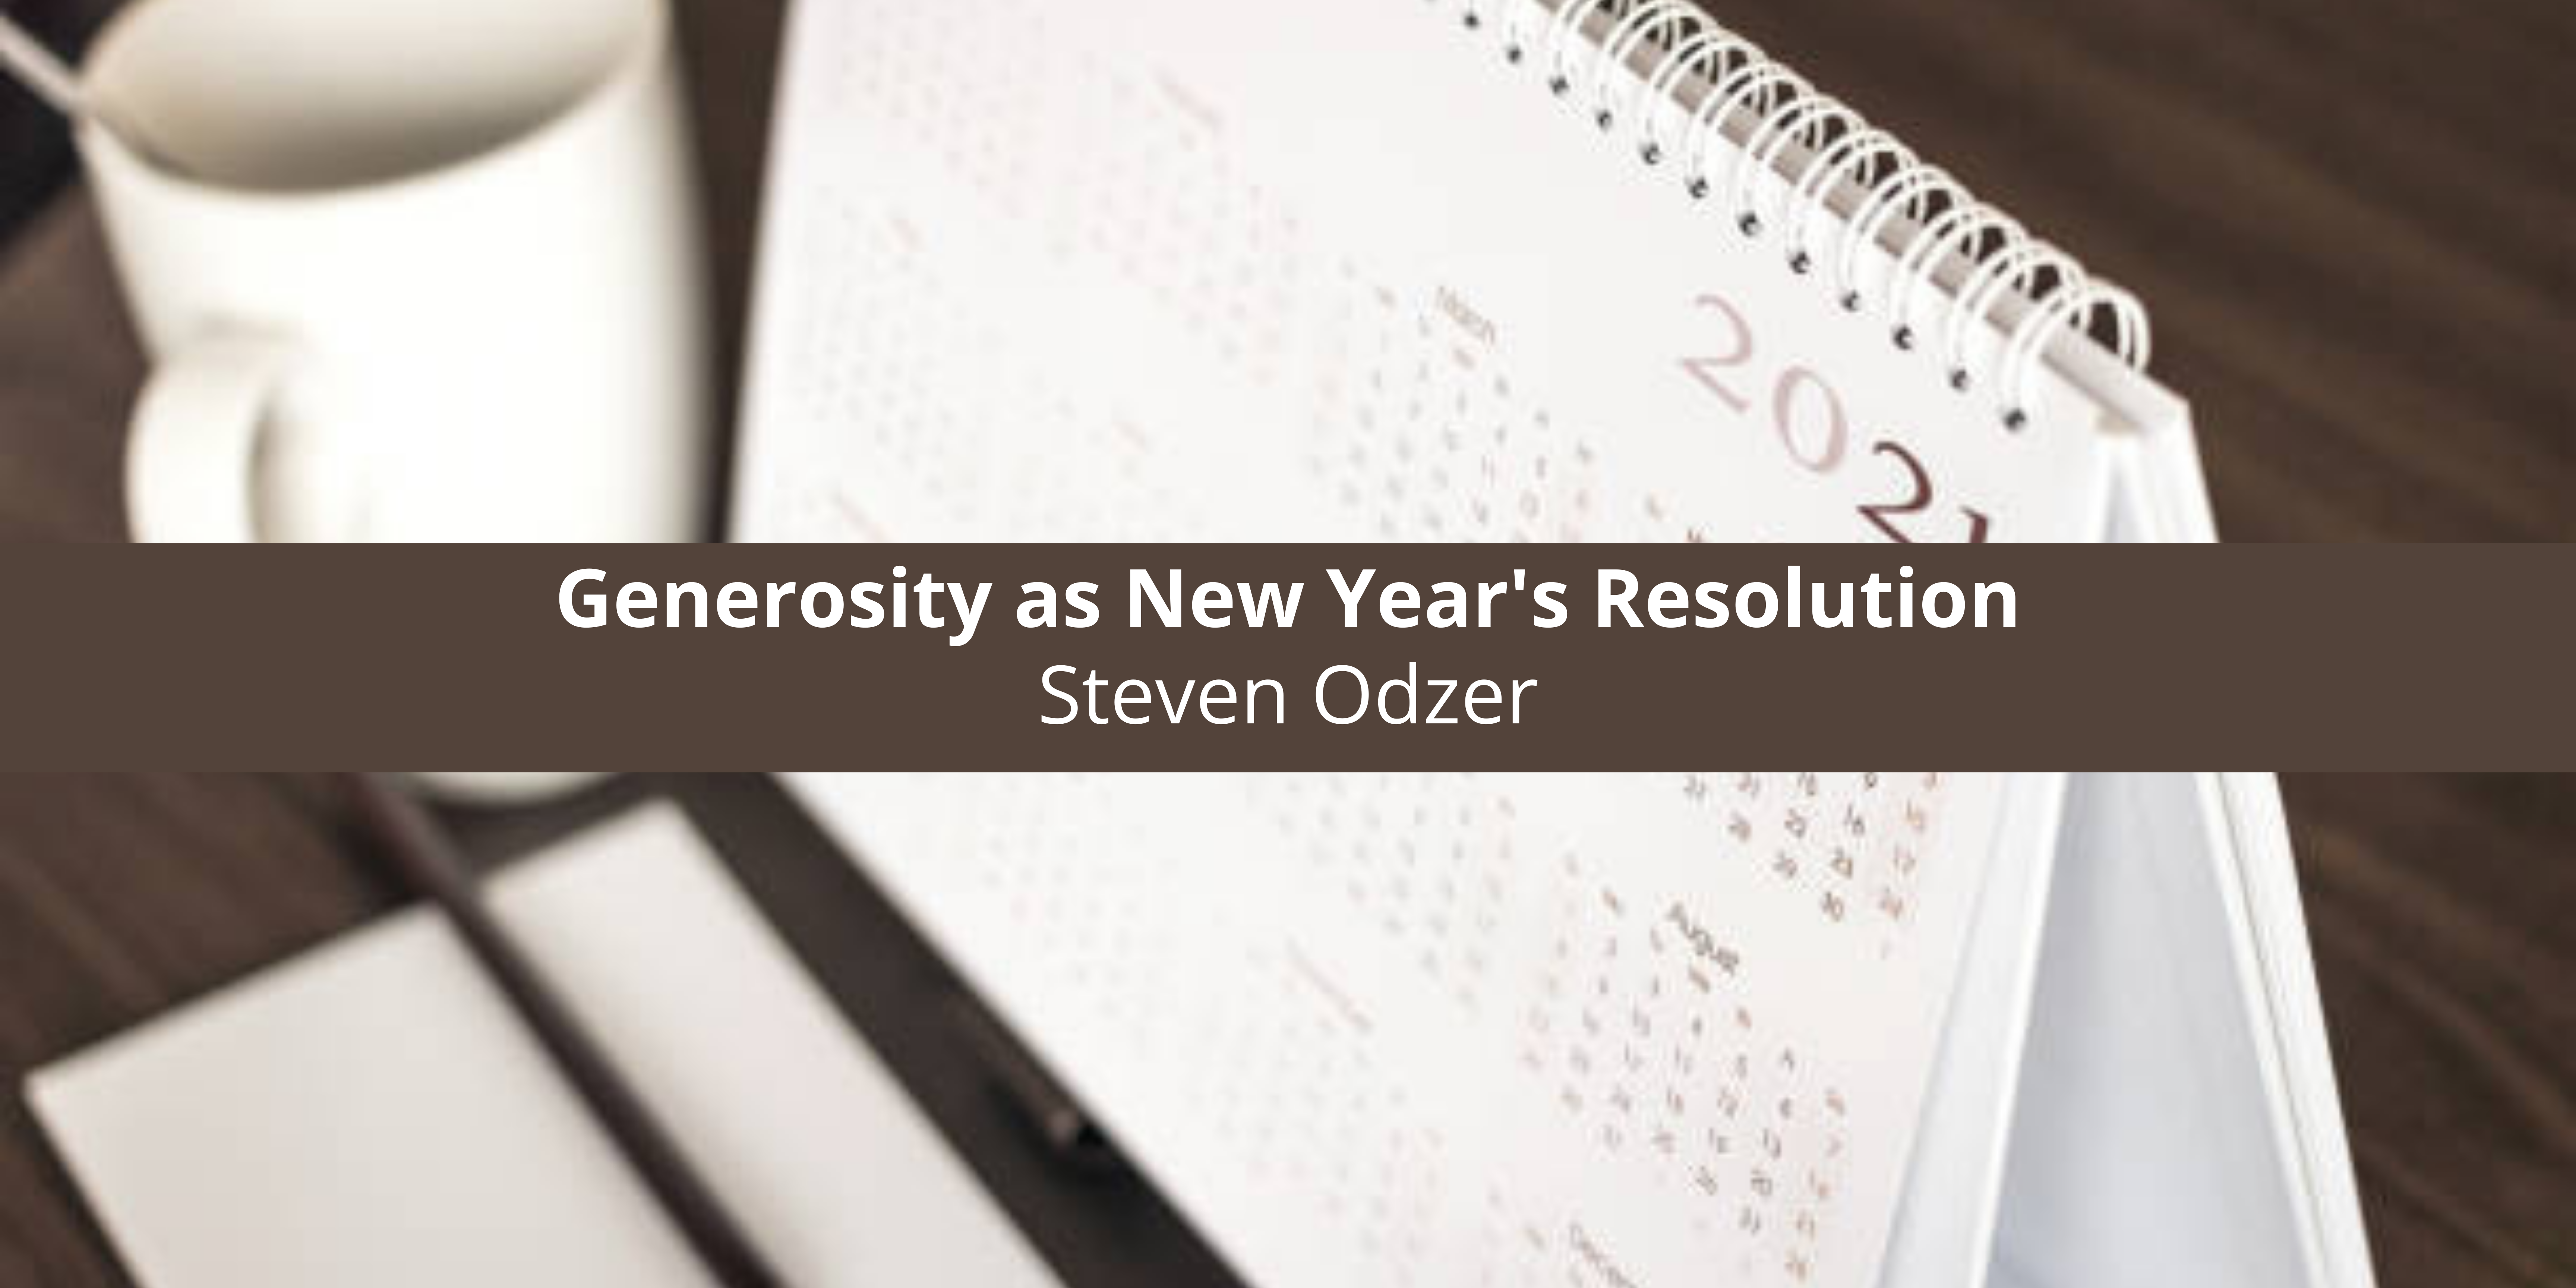 Steven Odzer Recommends Generosity as New Year's Resolution